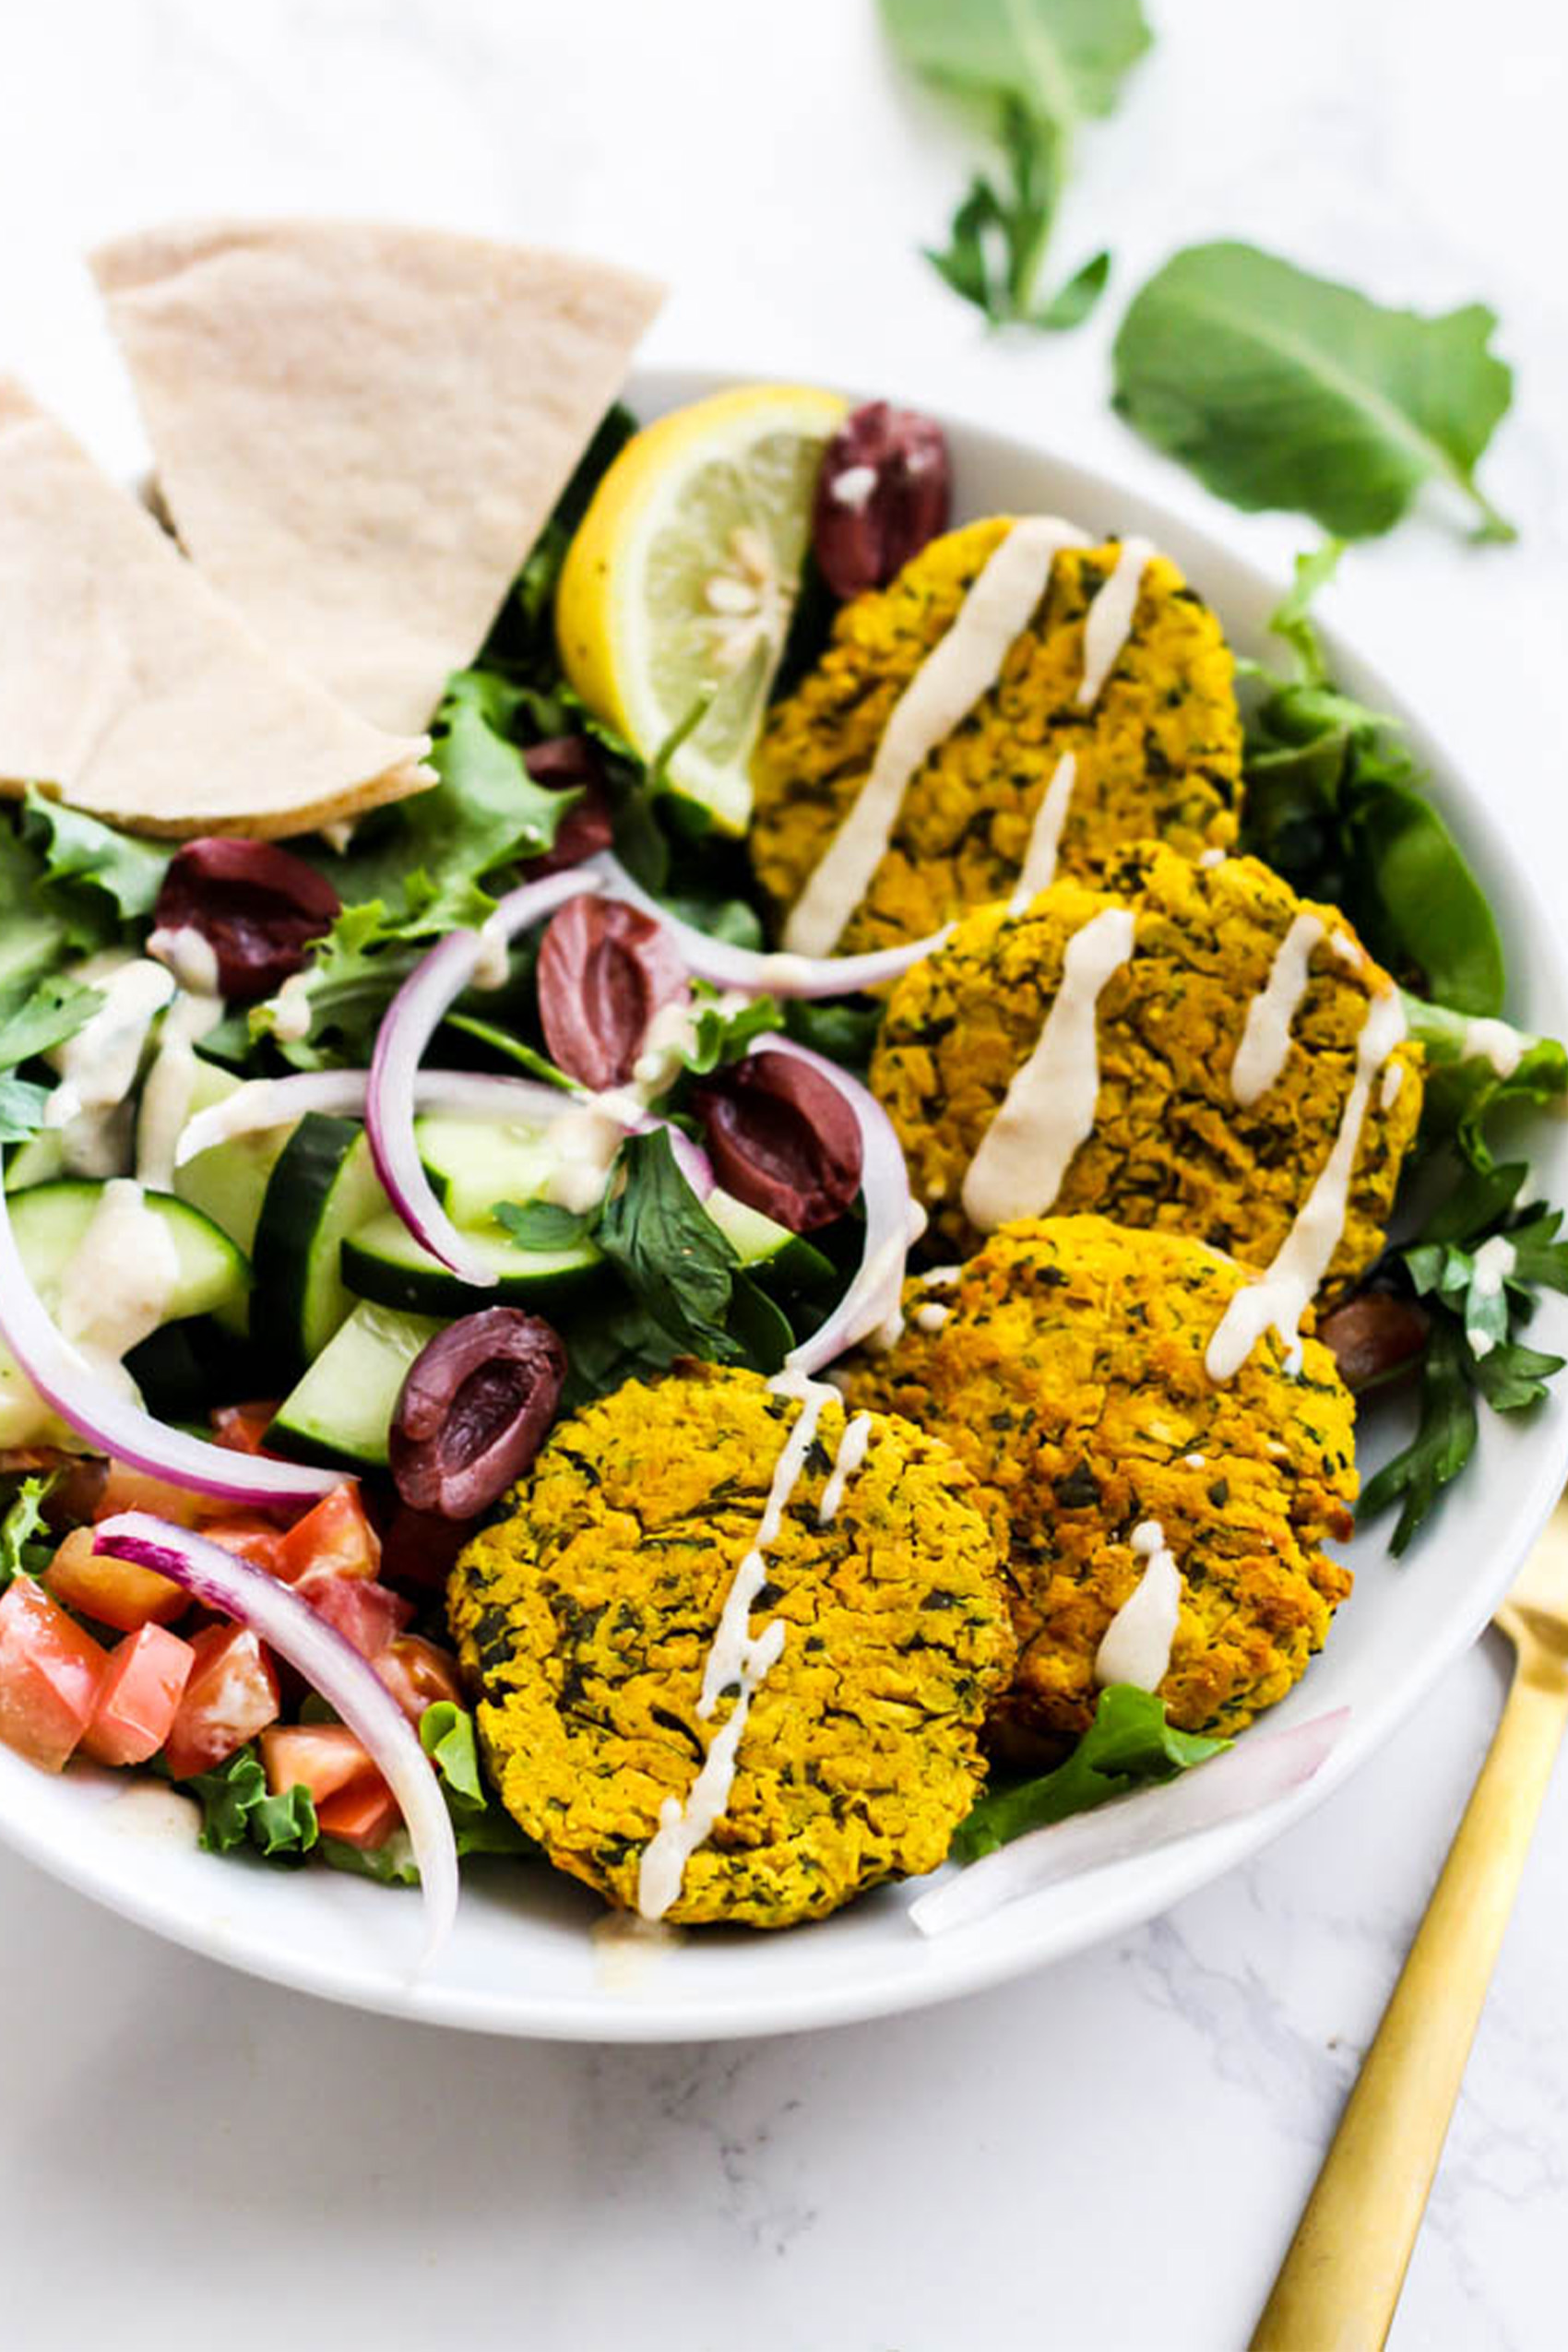 a falafel bowl with four falafel patties served over greens with olives, onions and tomatoes